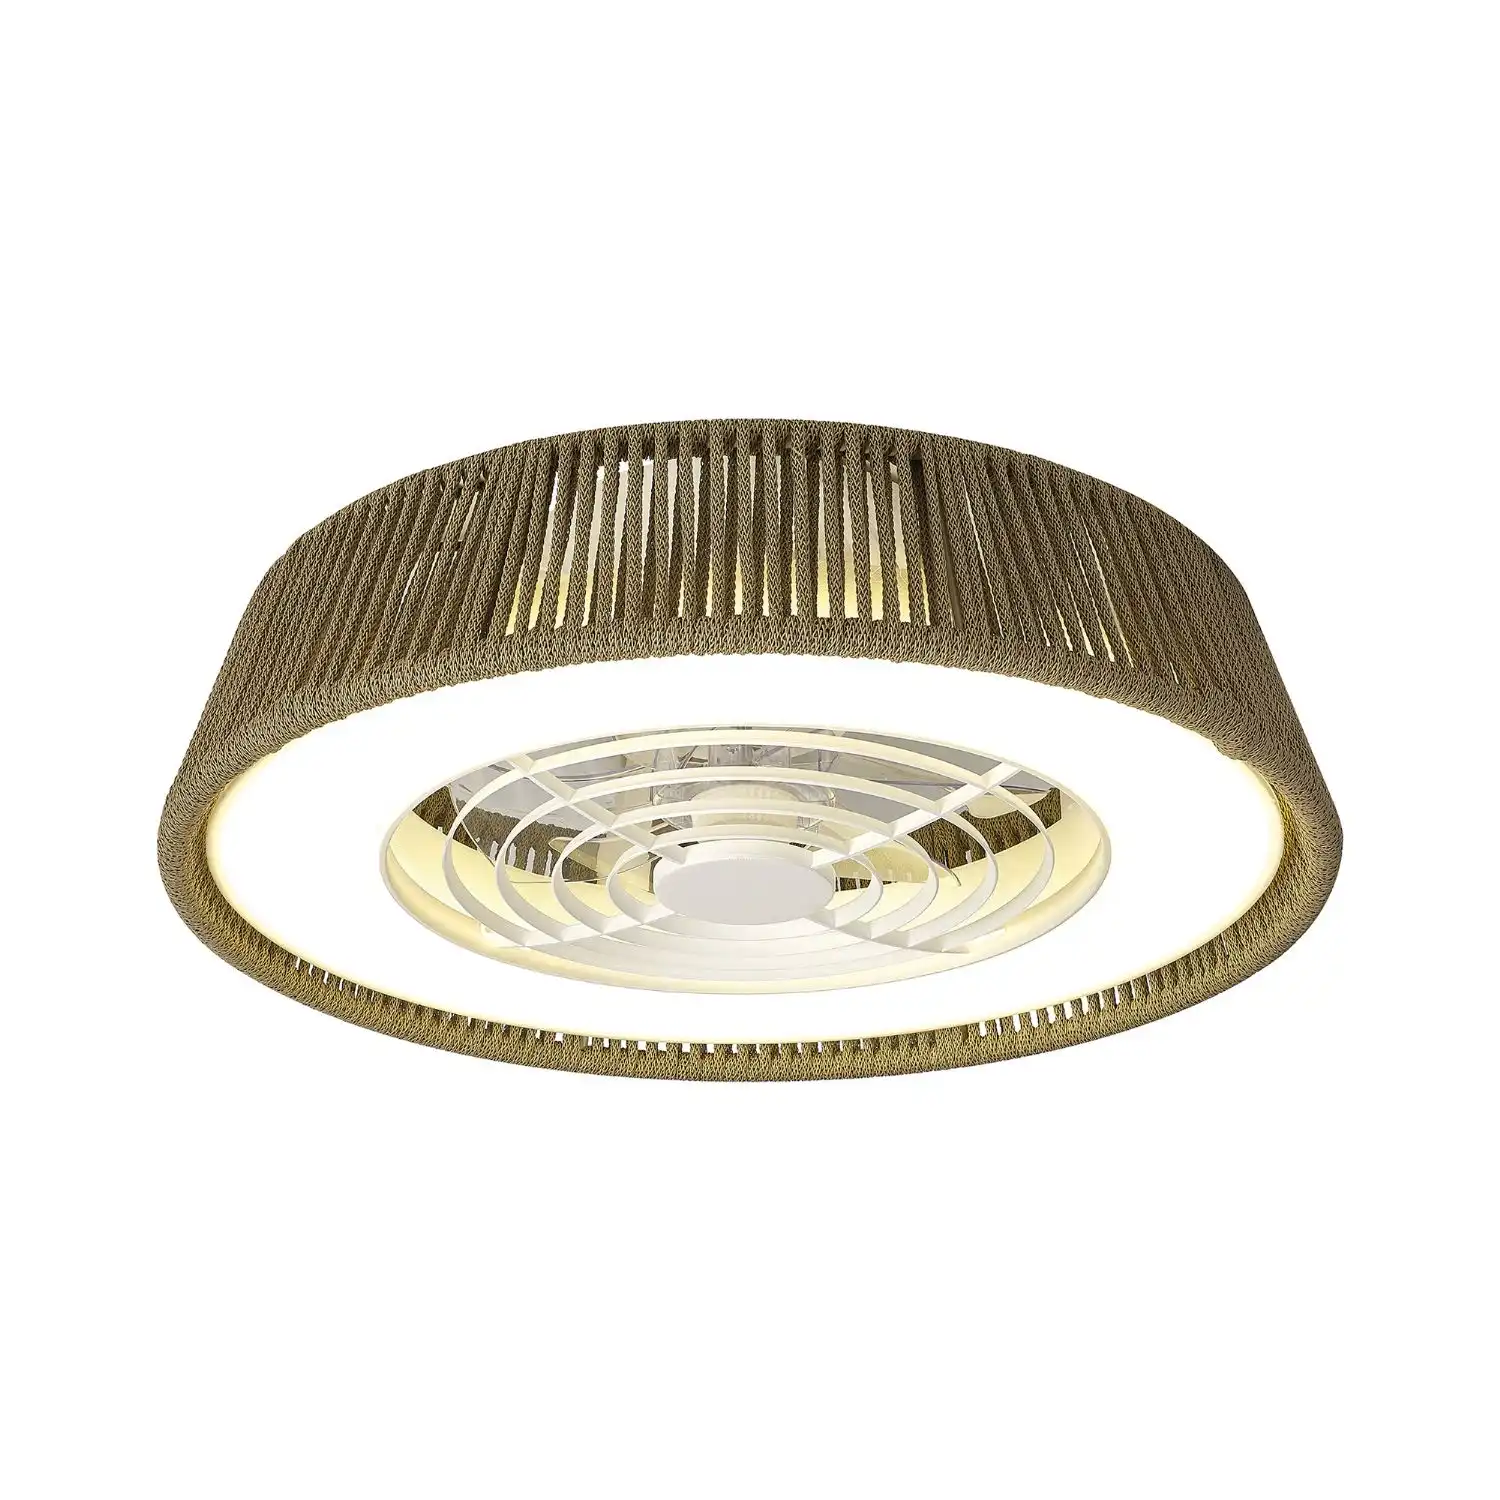 Polinesia Nautica 70W LED Dimmable Ceiling Light With Built In 35W DC Reversible Fan, Beige Oscu, 4200lm, 5yrs Warranty